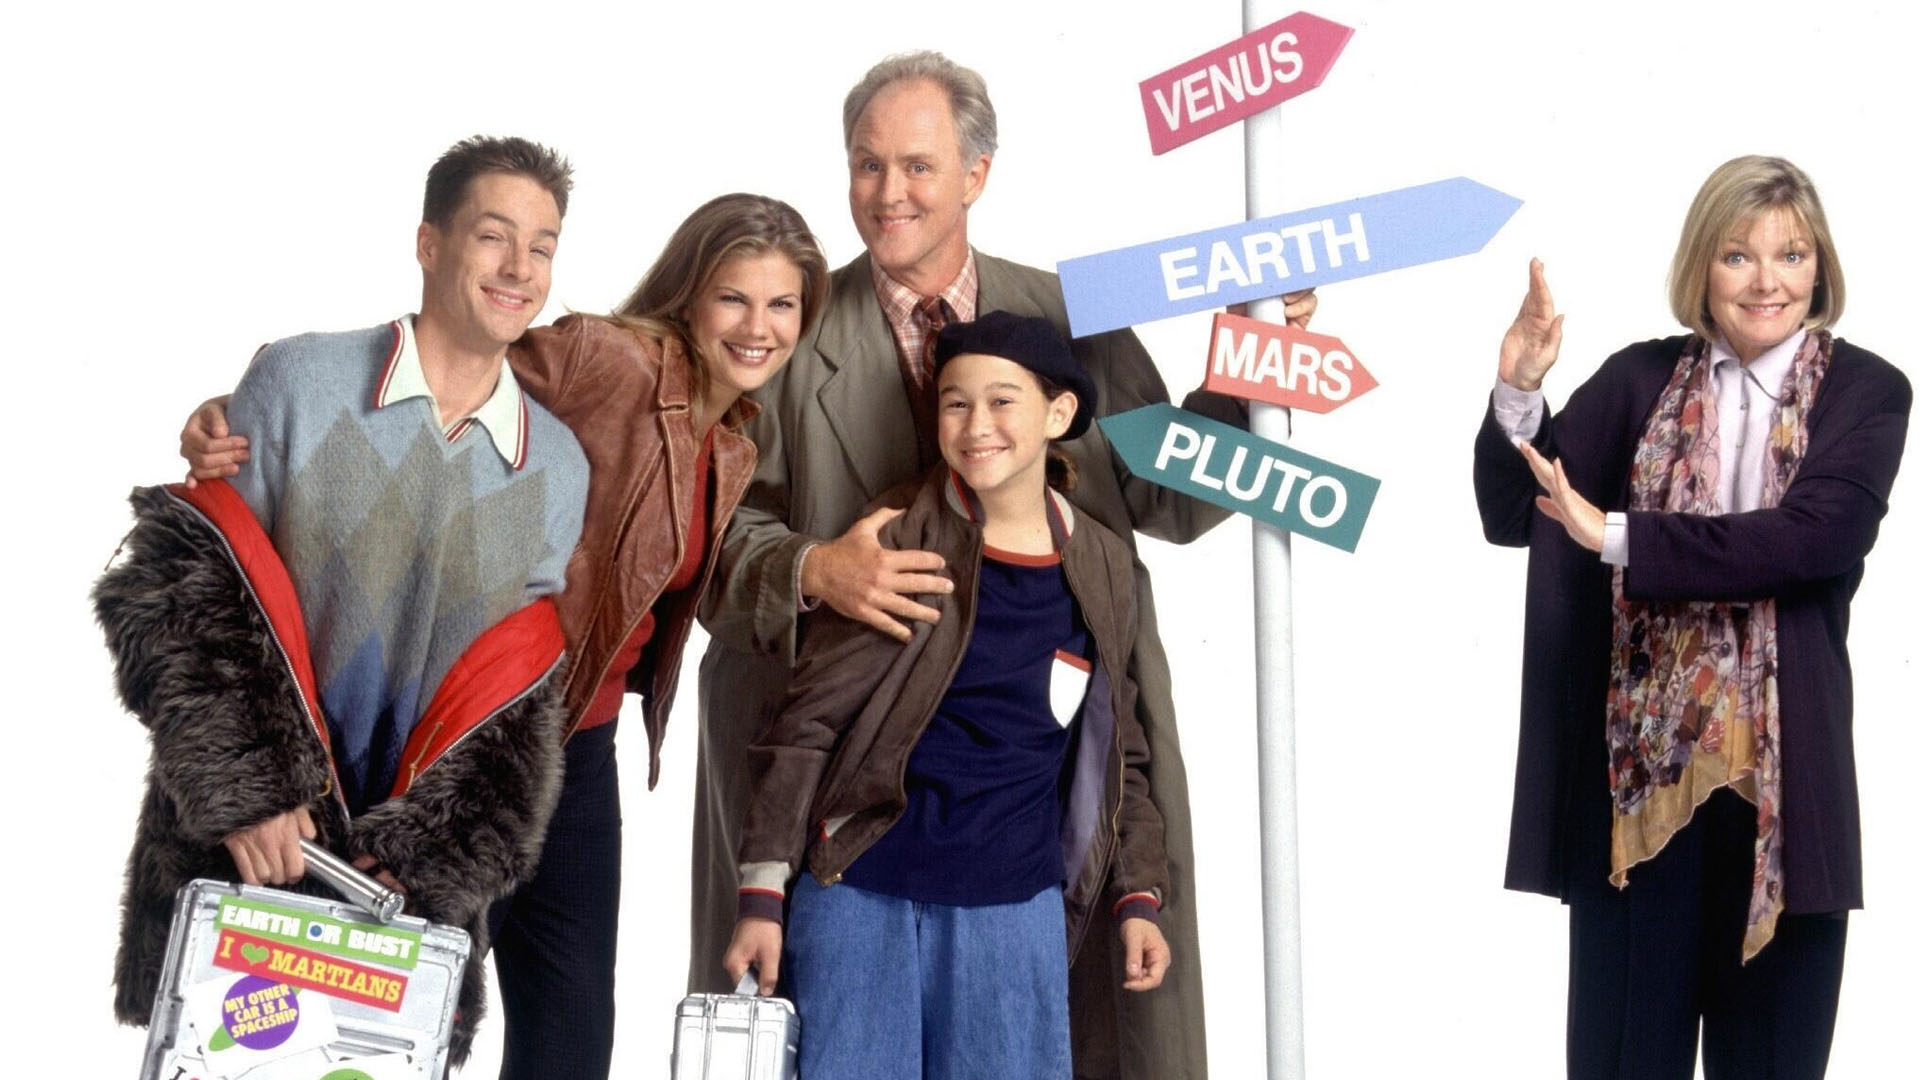 TV Show 3rd Rock From The Sun HD Wallpaper | Background Image